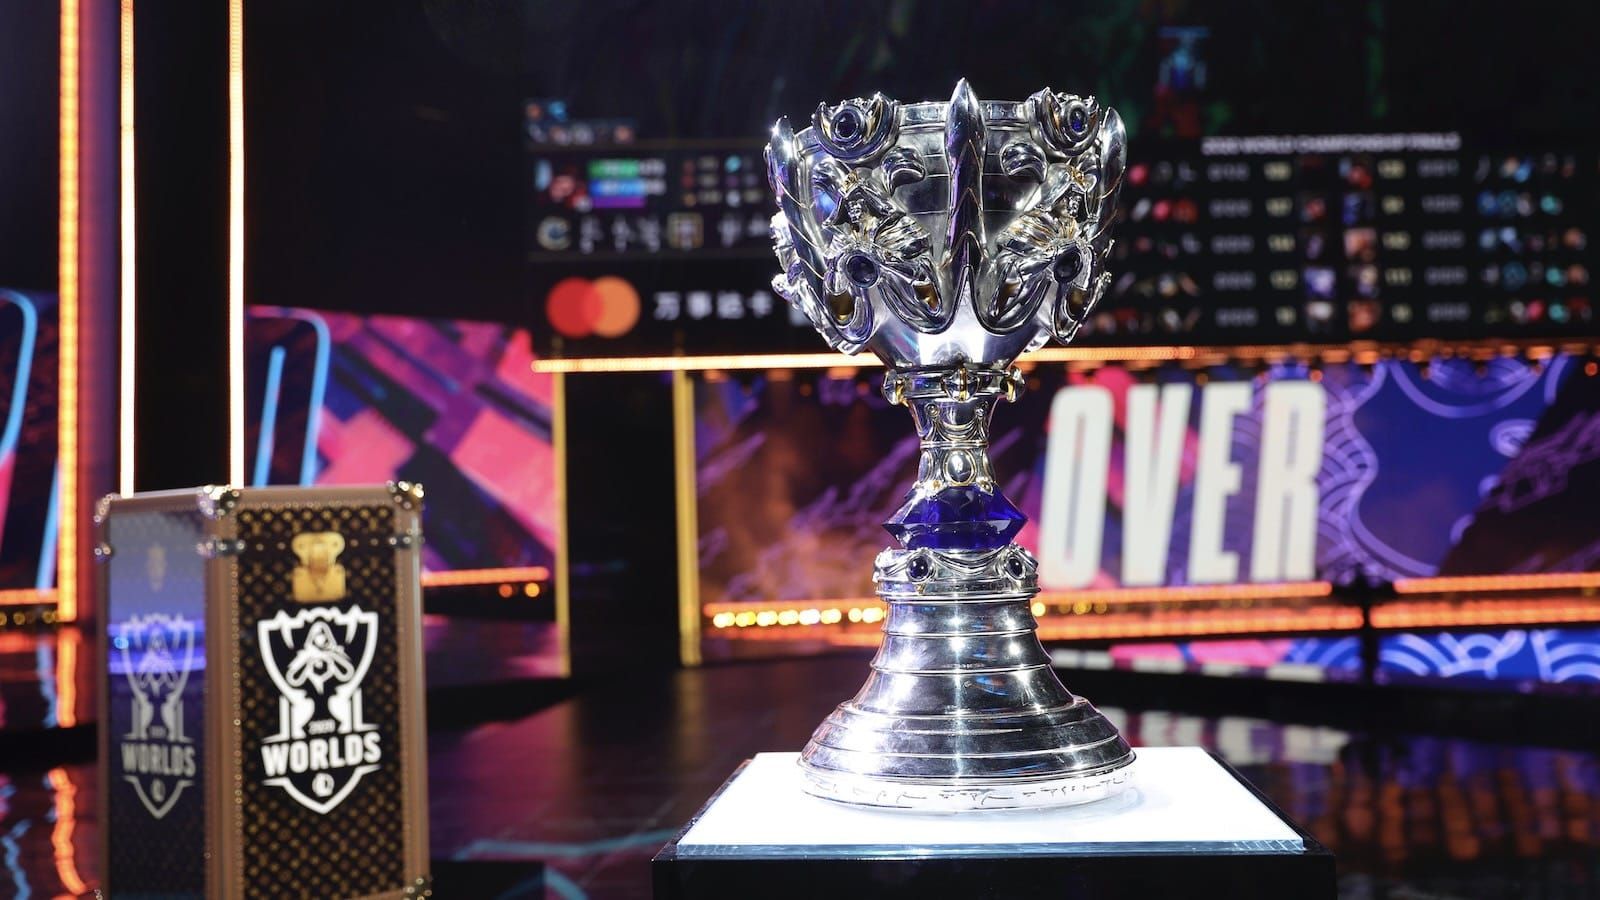 The LOL World Championship is Nearly Here! - The Game of Nerds